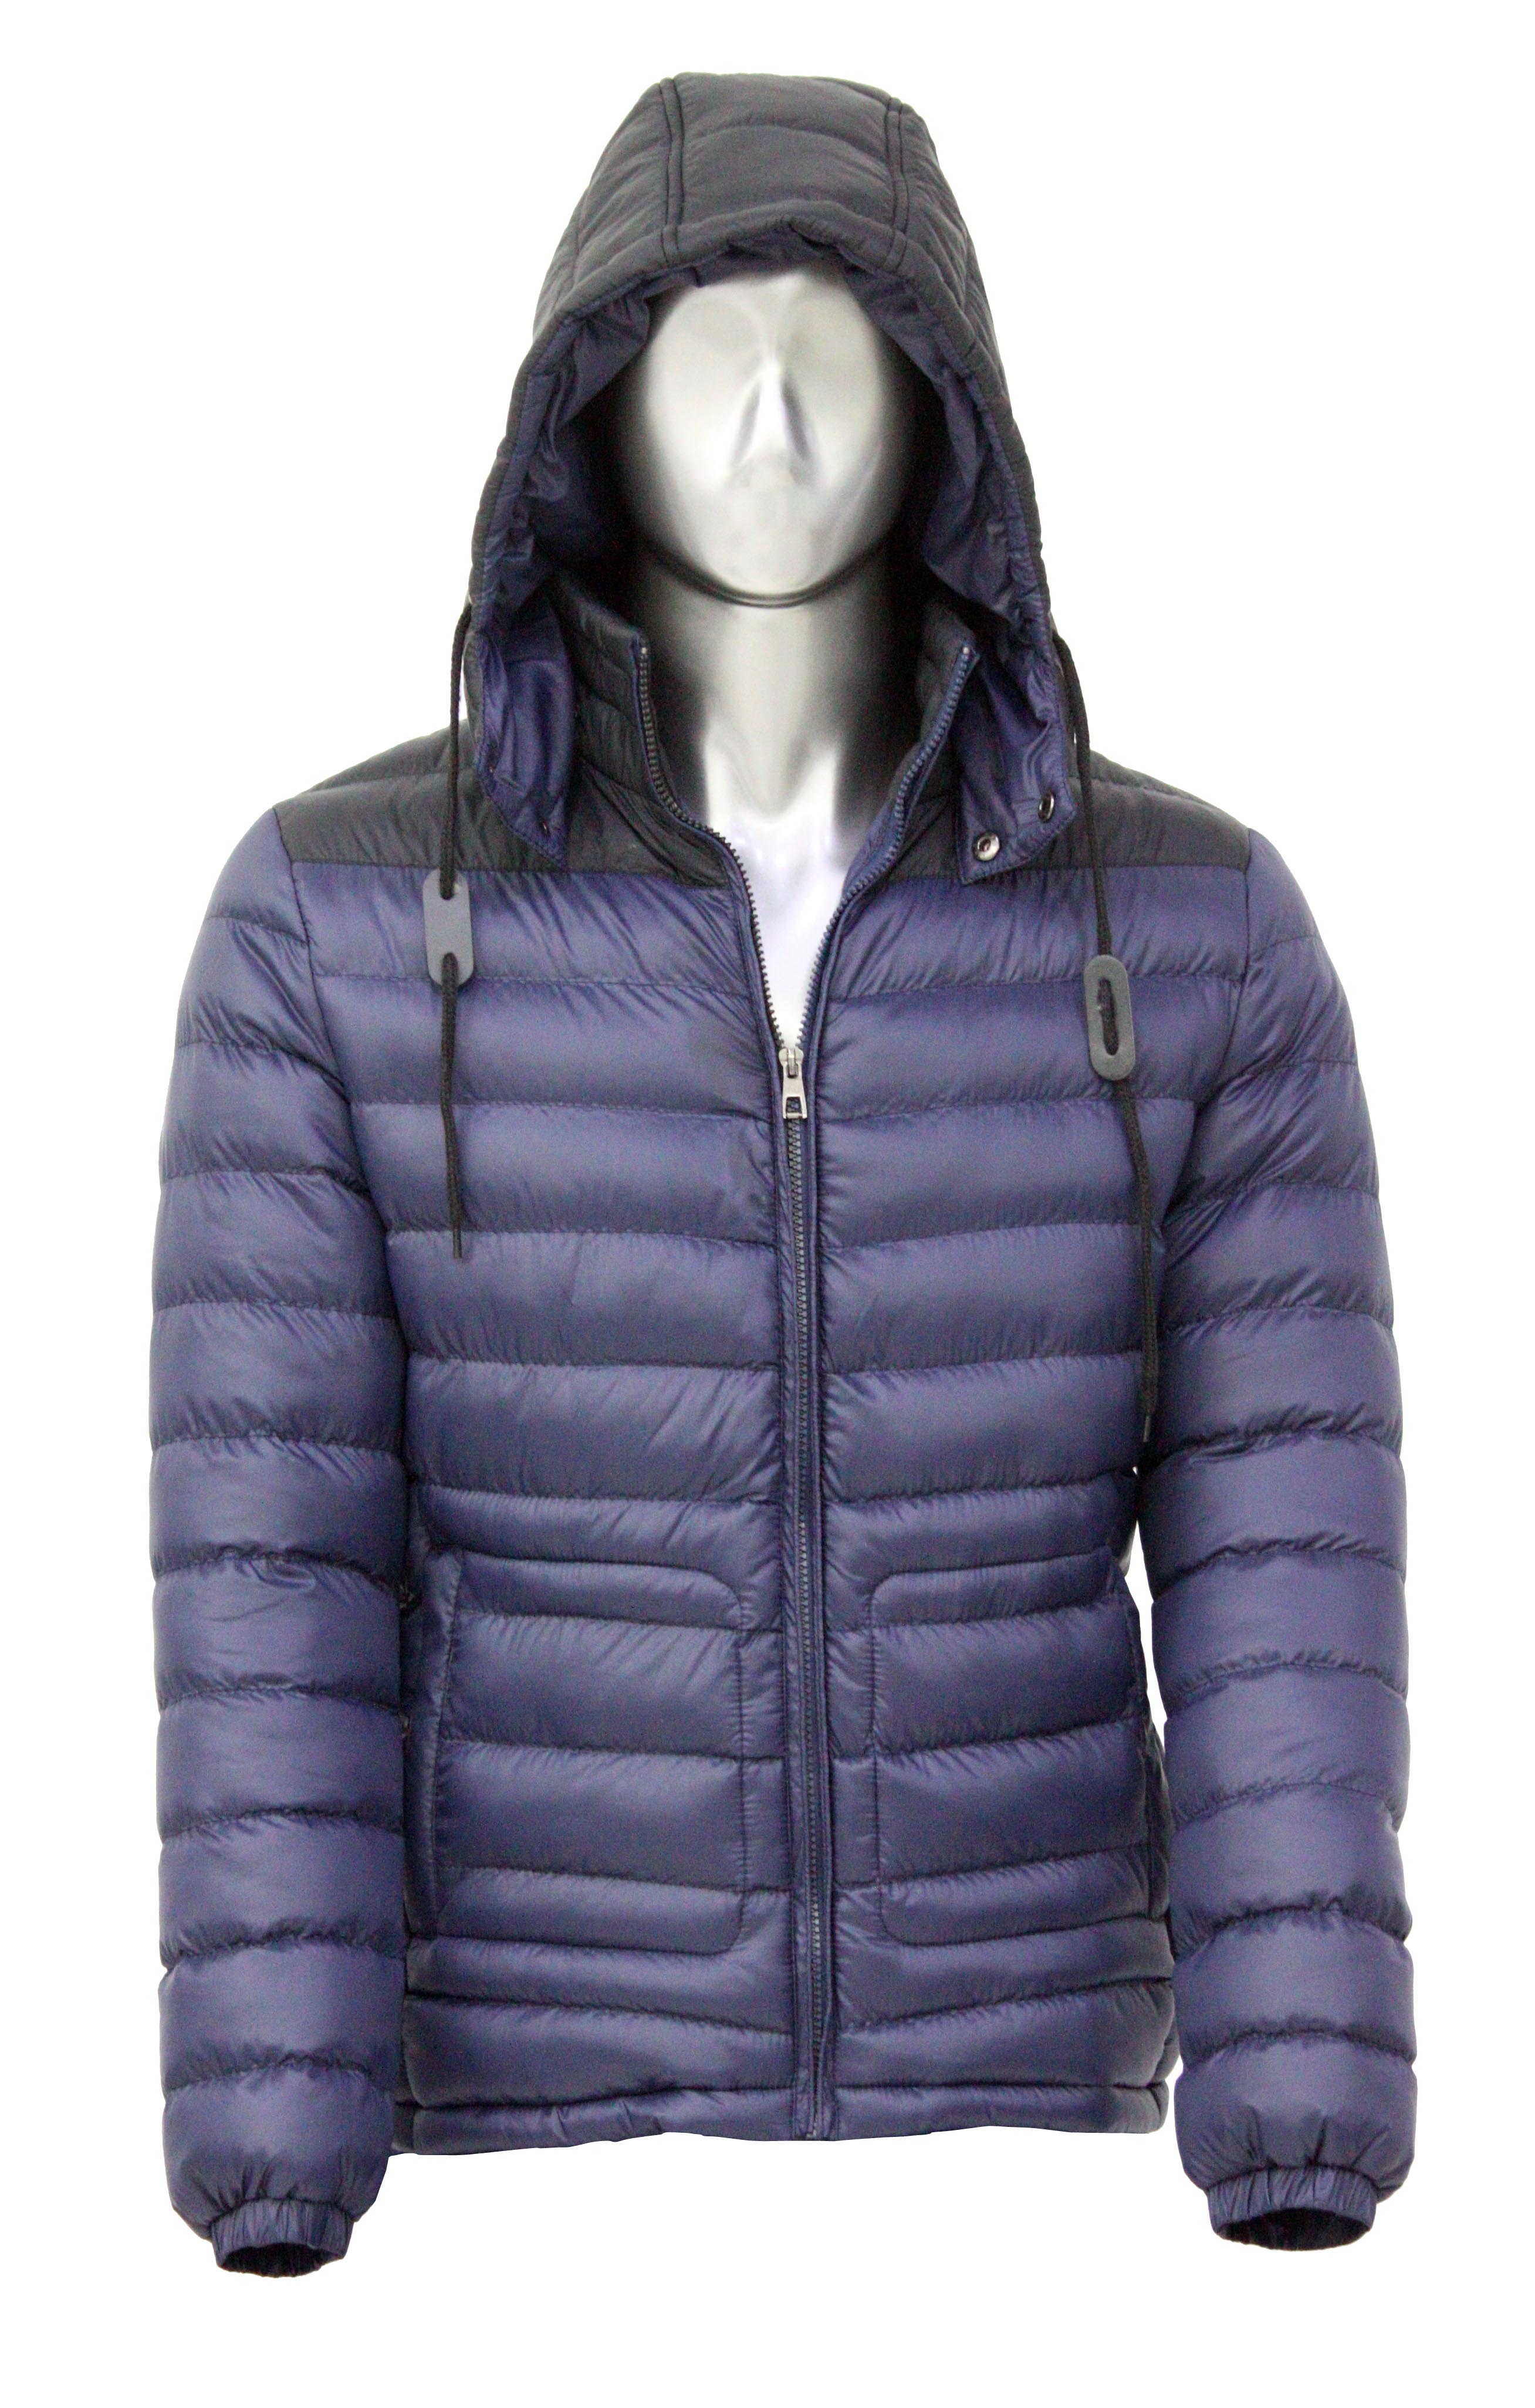 man quilted jacket MJ21581AP